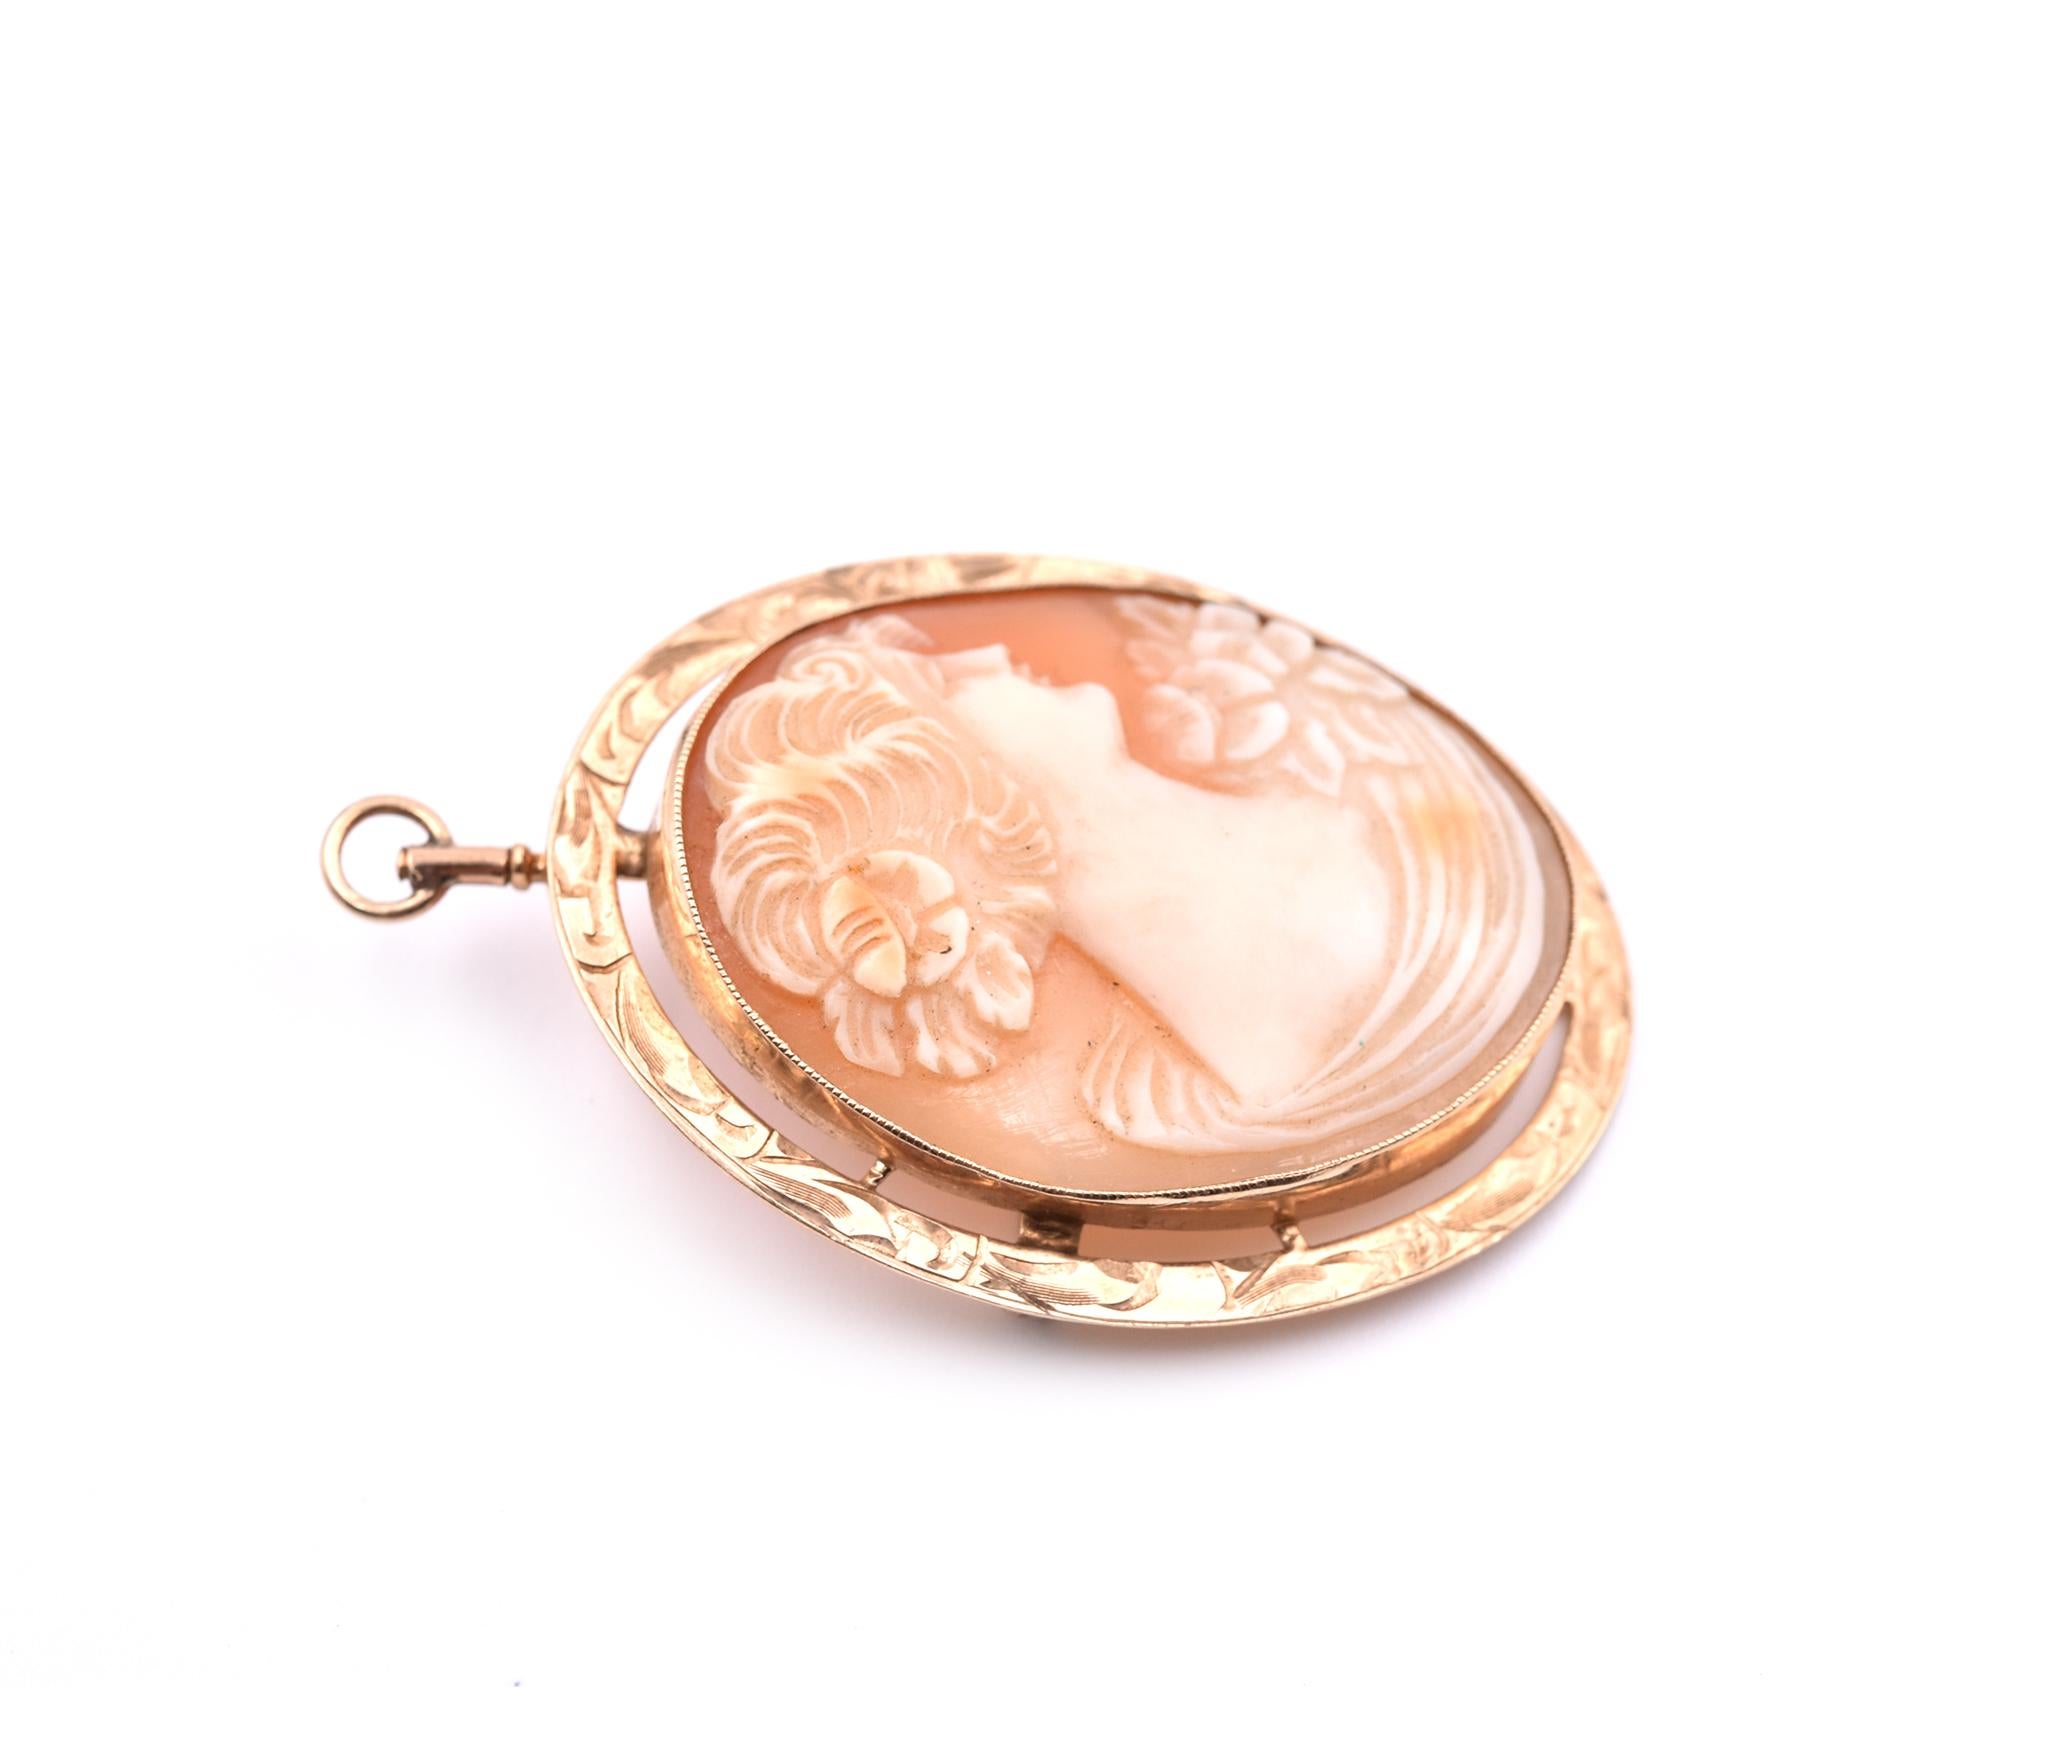 10 Karat Yellow Gold Cameo Pin In Excellent Condition For Sale In Scottsdale, AZ